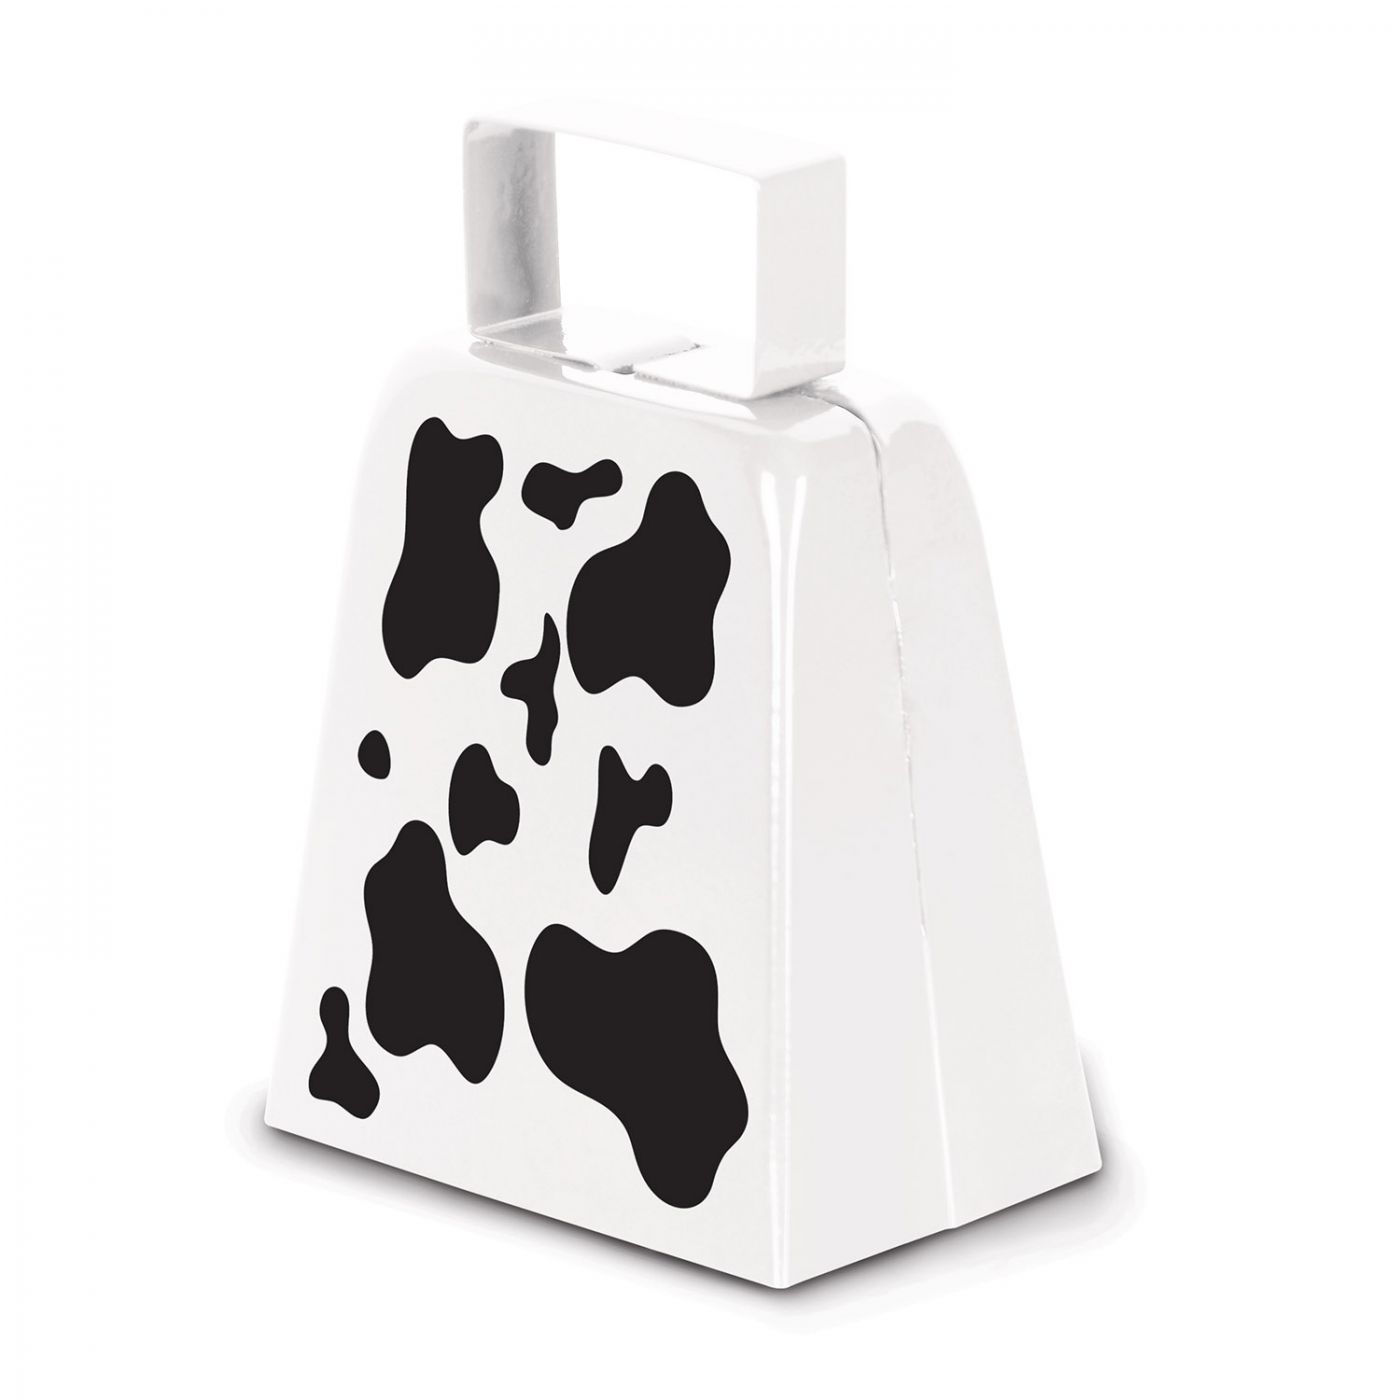 Cow Print Cowbell image